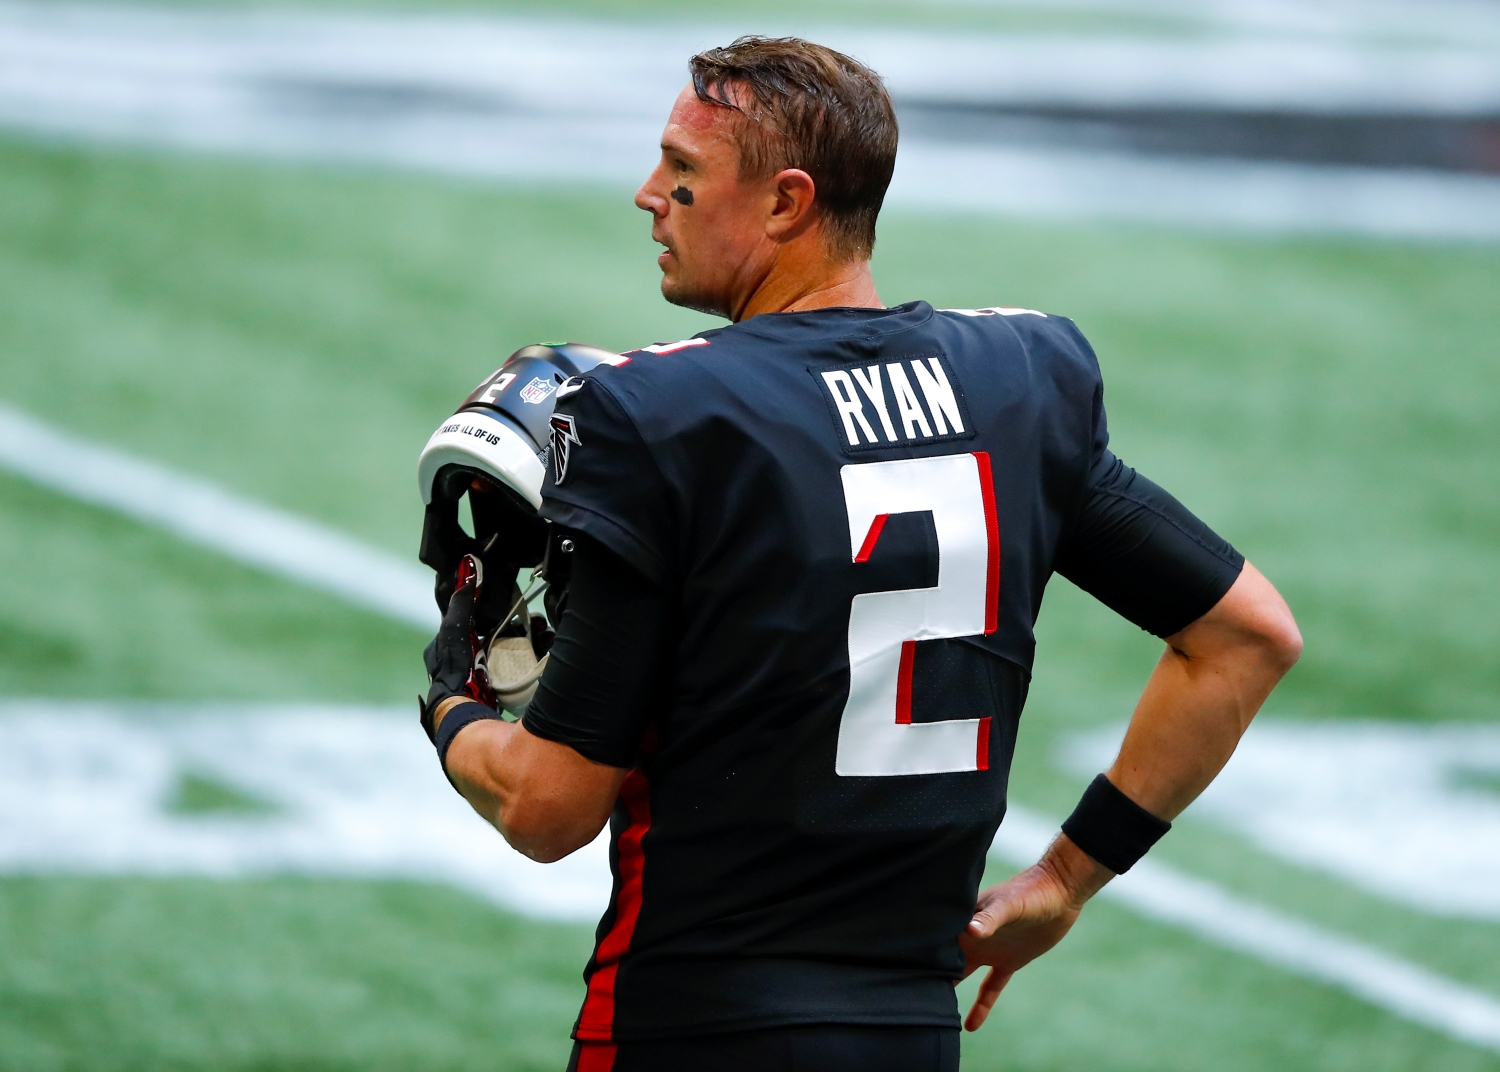 Atlanta Falcons quarterback Matt Ryan stands with his helmet off before a game against the Chicago Bears.